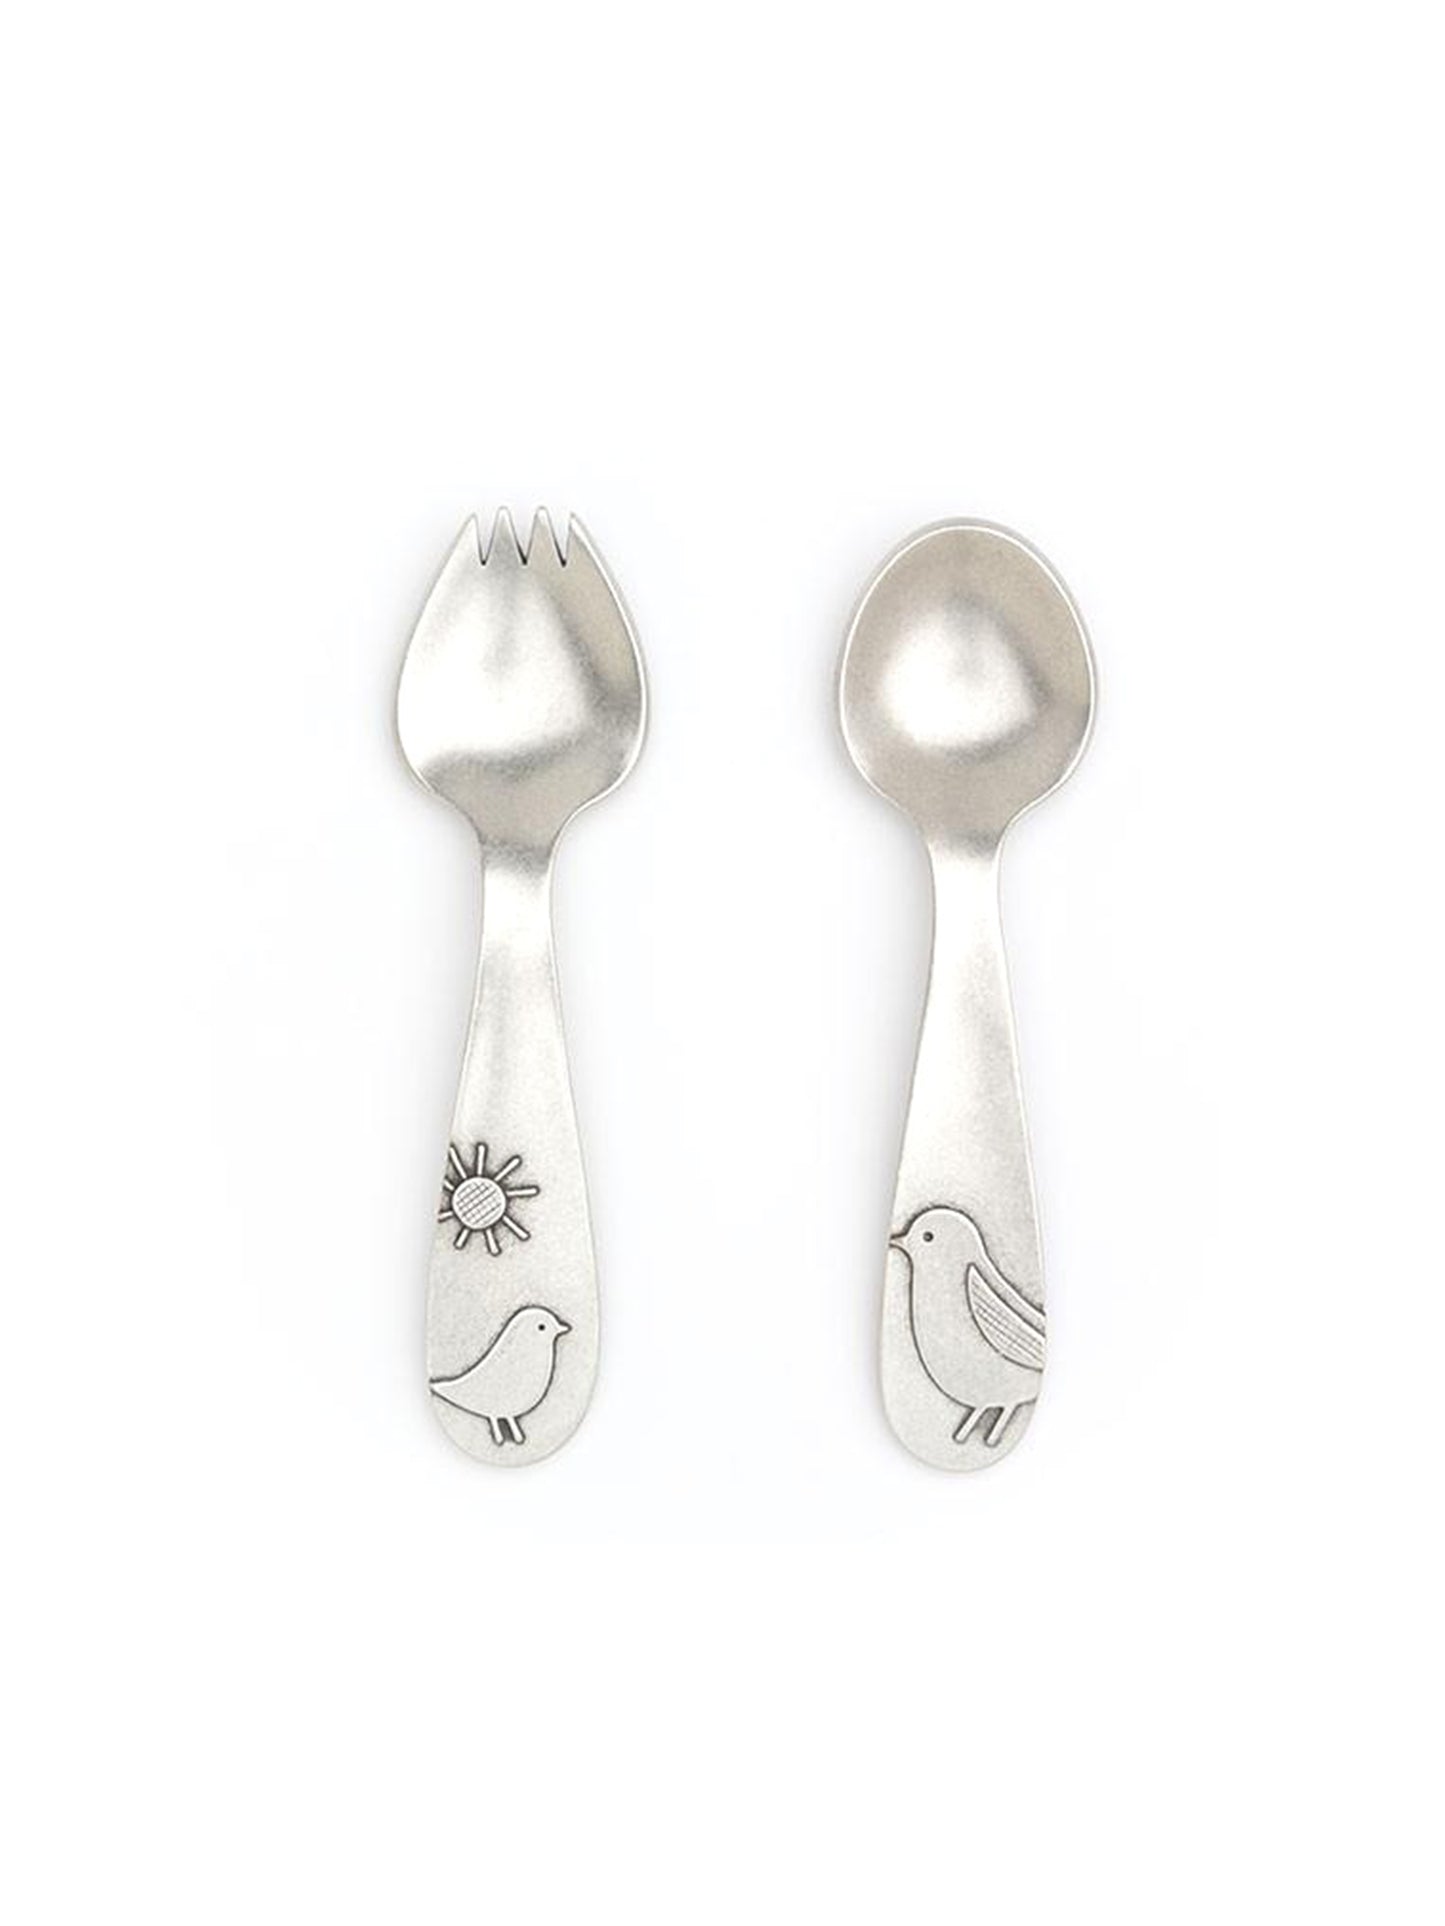 Beehive Handmade Pewter Momma and Baby Bird Fork and Spoon Set Weston Table